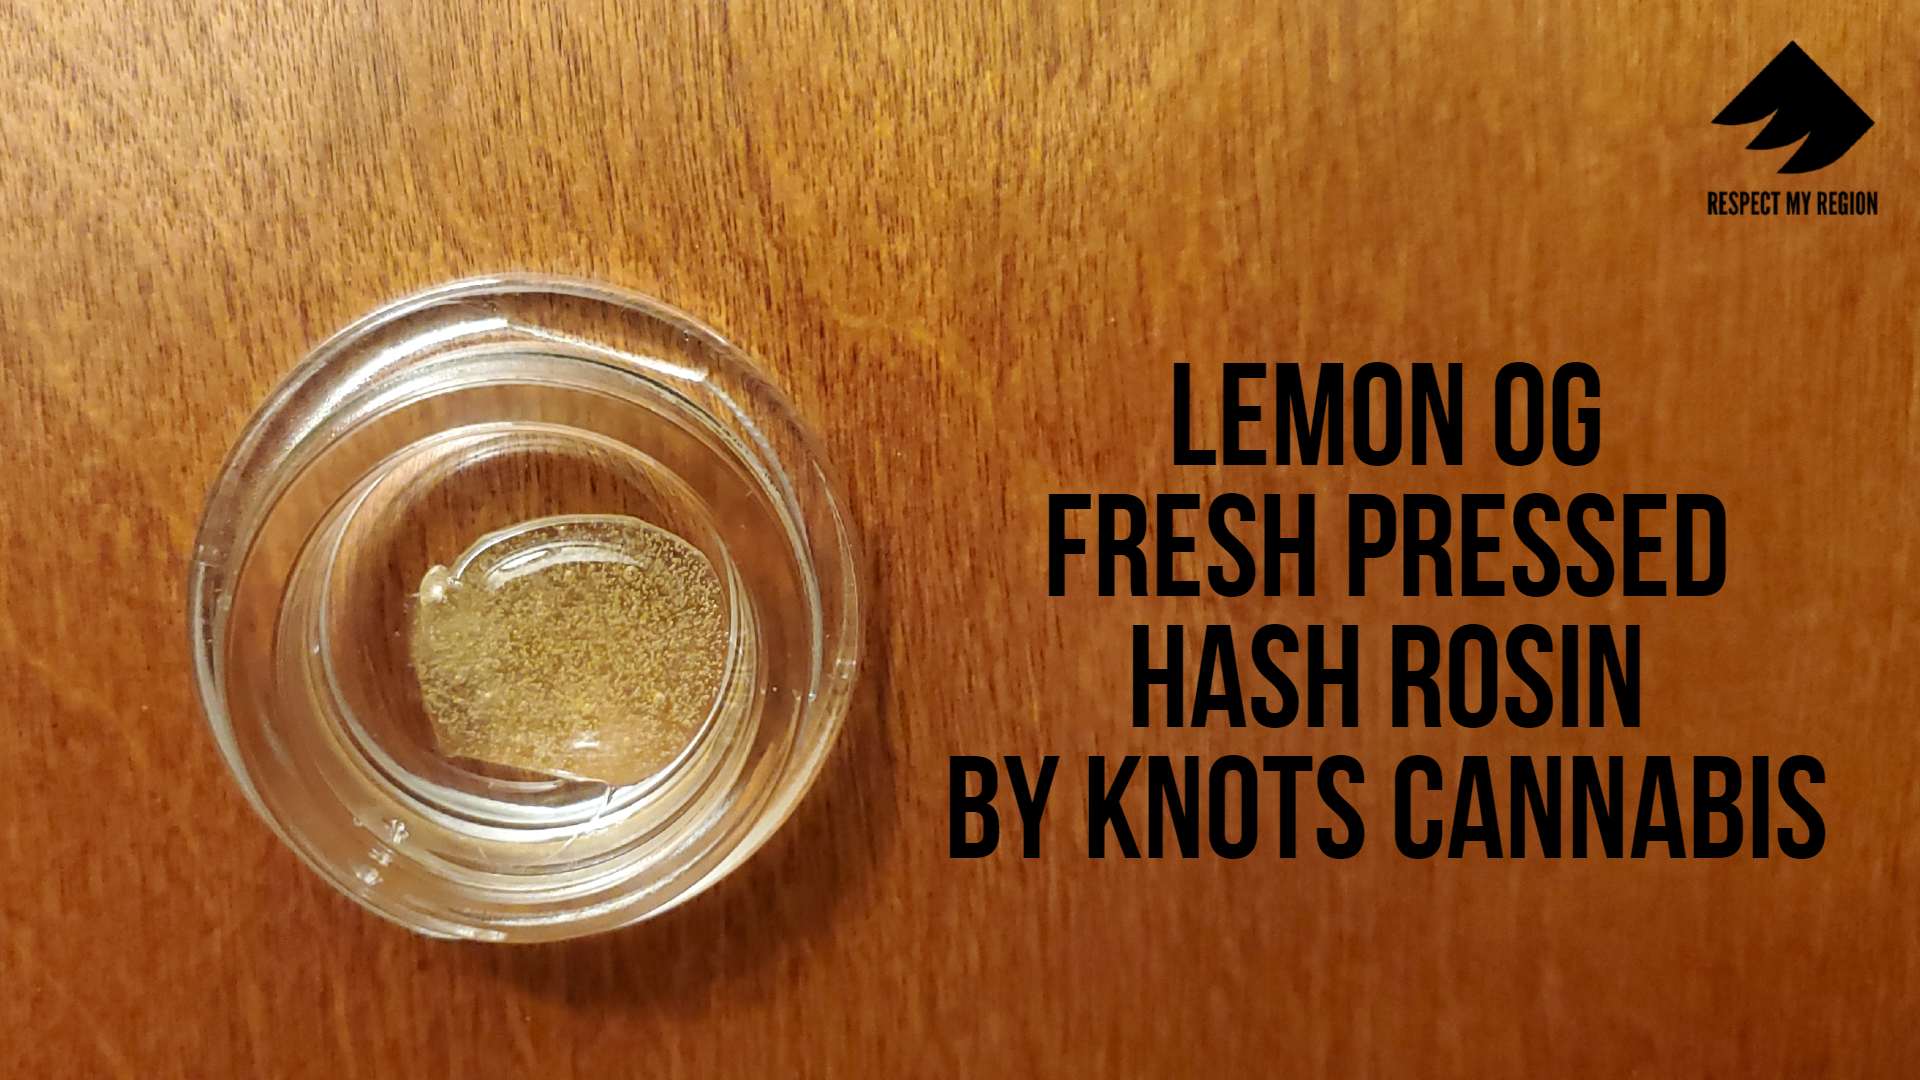 Lemon OG Fresh Pressed Hash Rosin By Knots Cannabis Exclusively At Fweedom Washington Dispensaries For 4/20